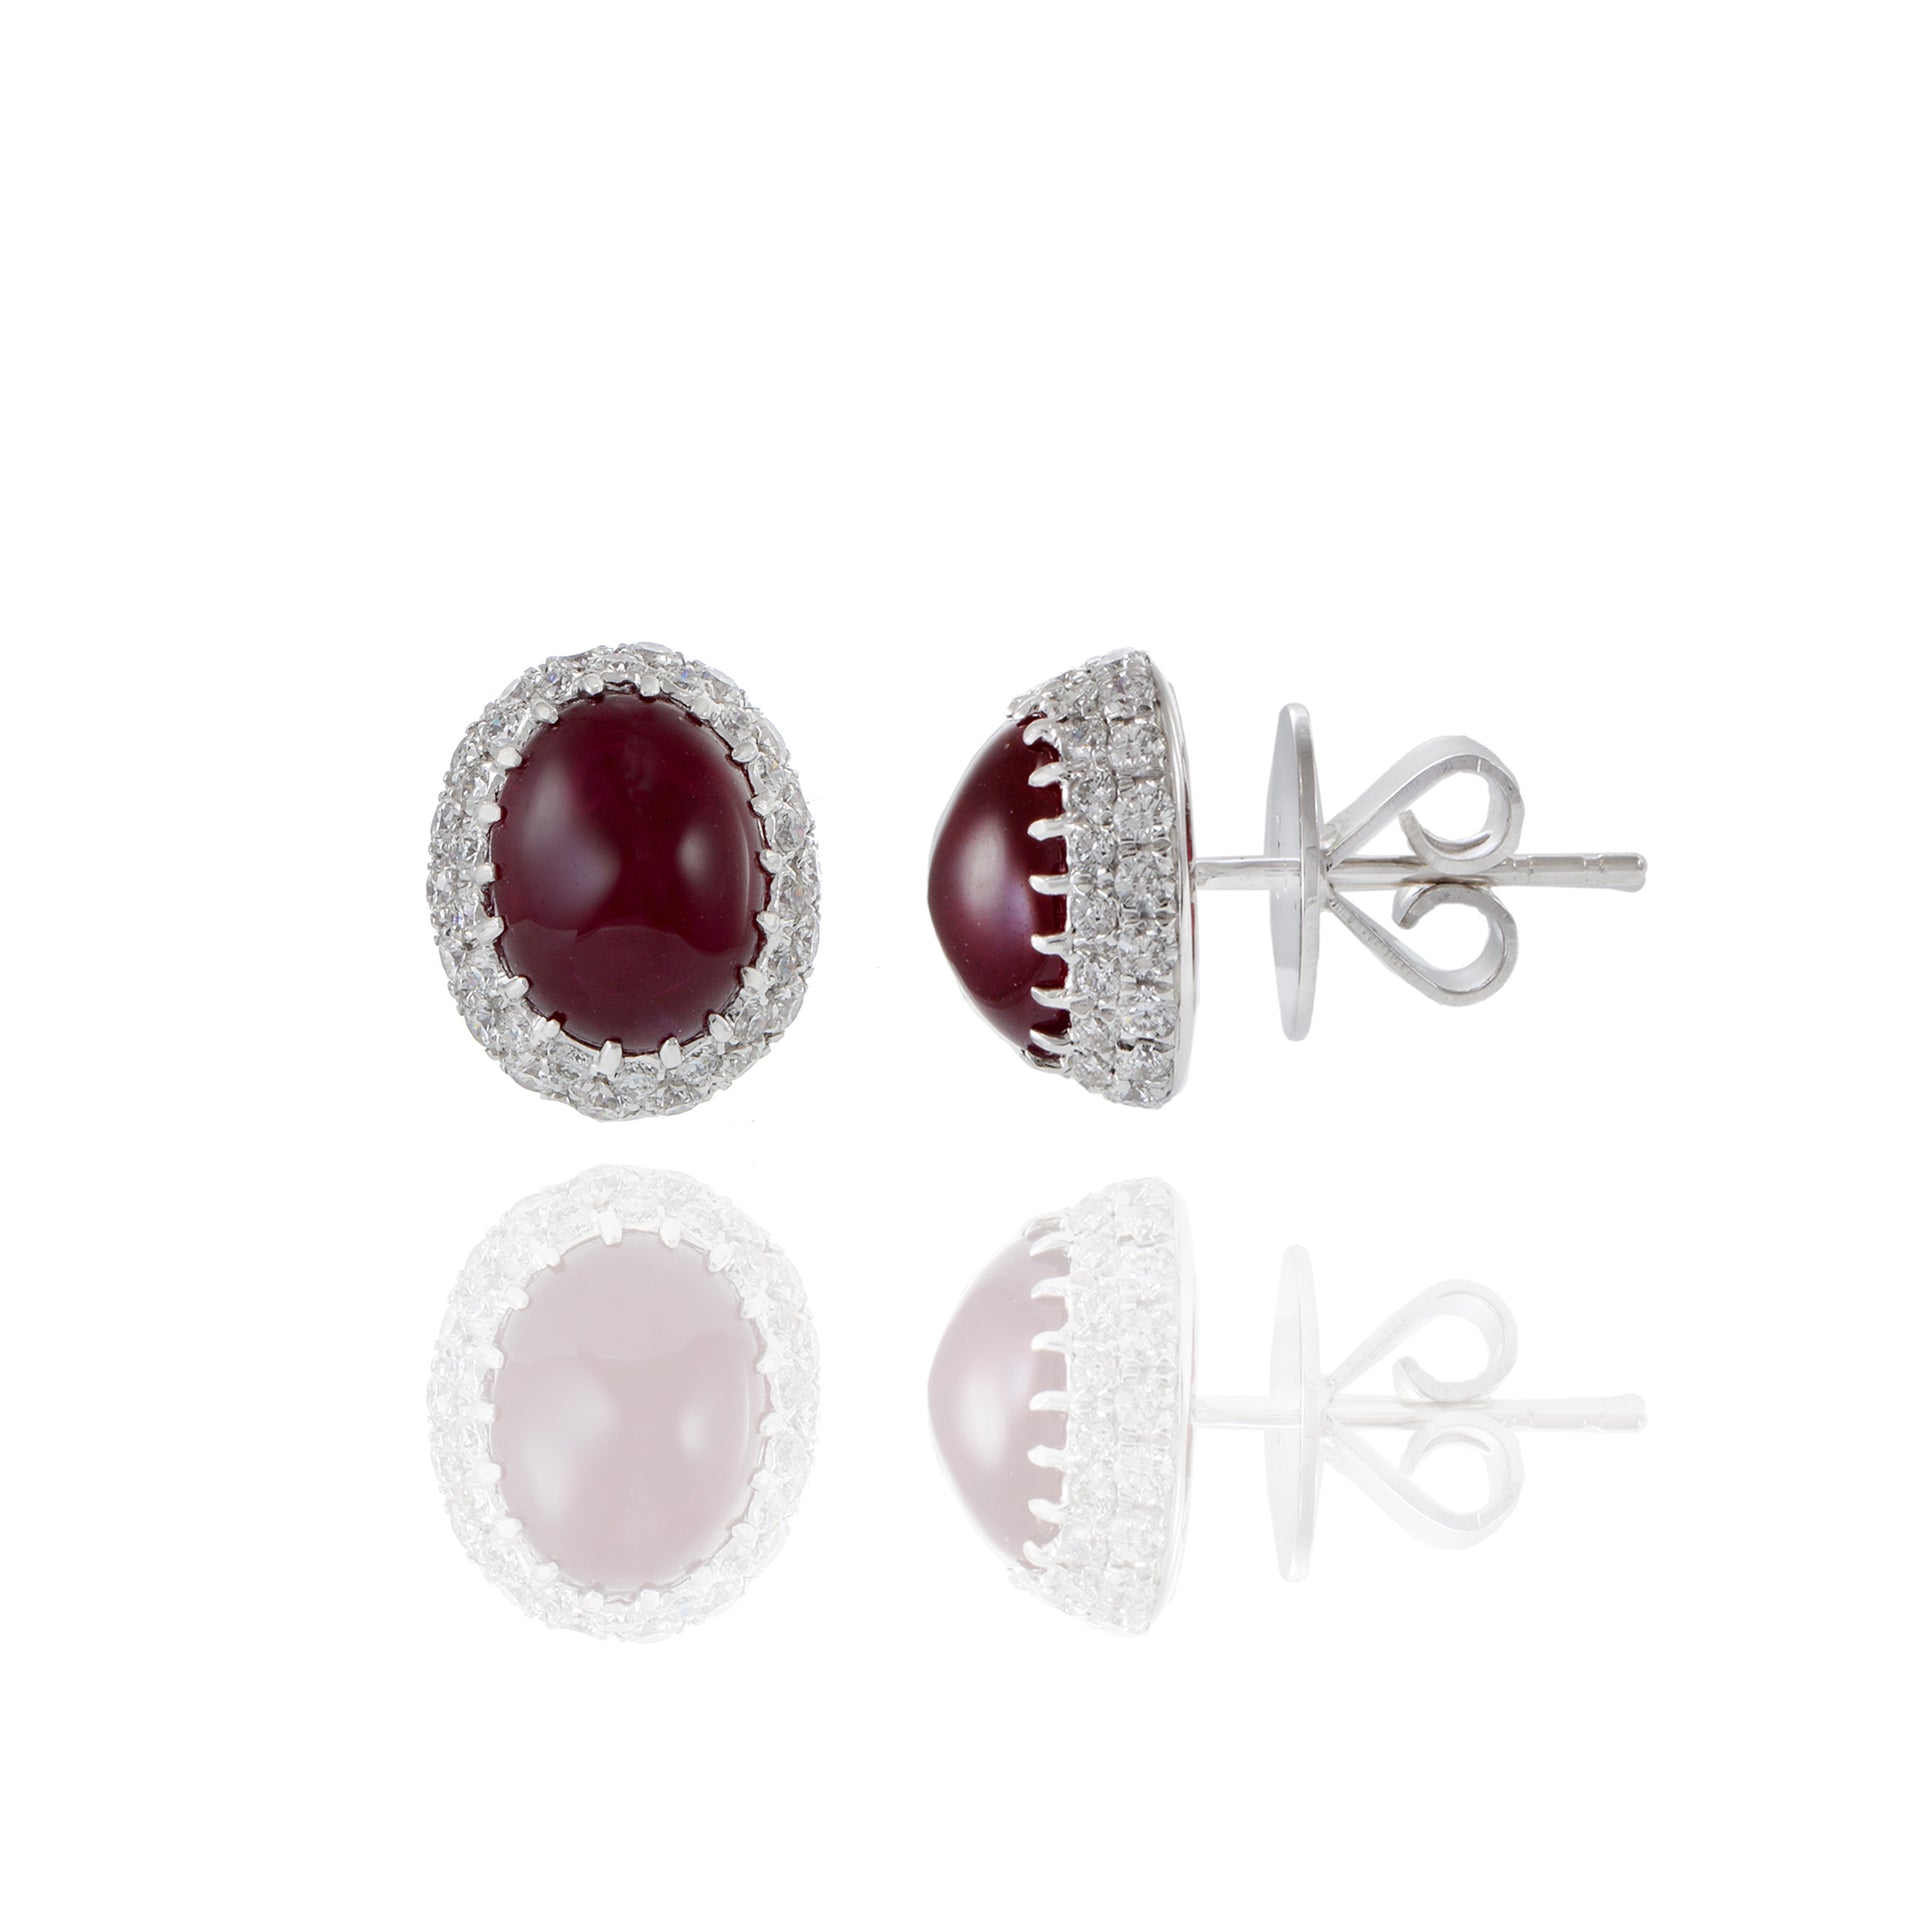 18KT White Gold Cabochon Burmese Ruby And Diamond Earrings